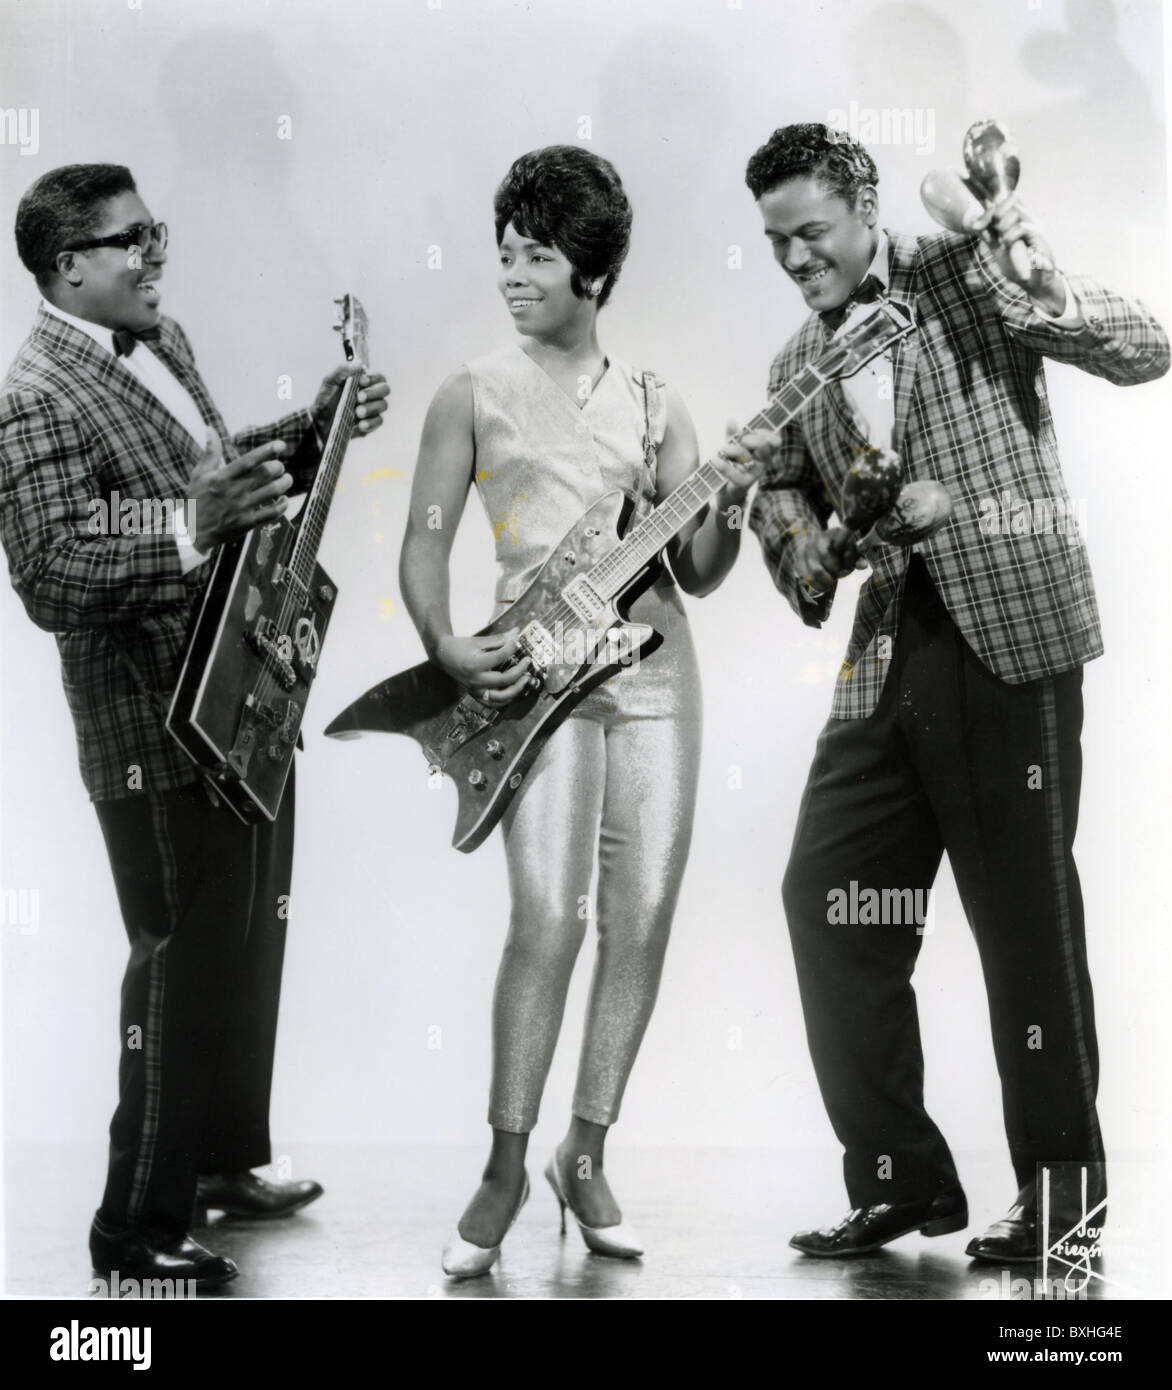 BO DIDDLEY US rock musician at left with The Duchess (Norma-Jean Wofford)  and Jerome Stock Photo - Alamy